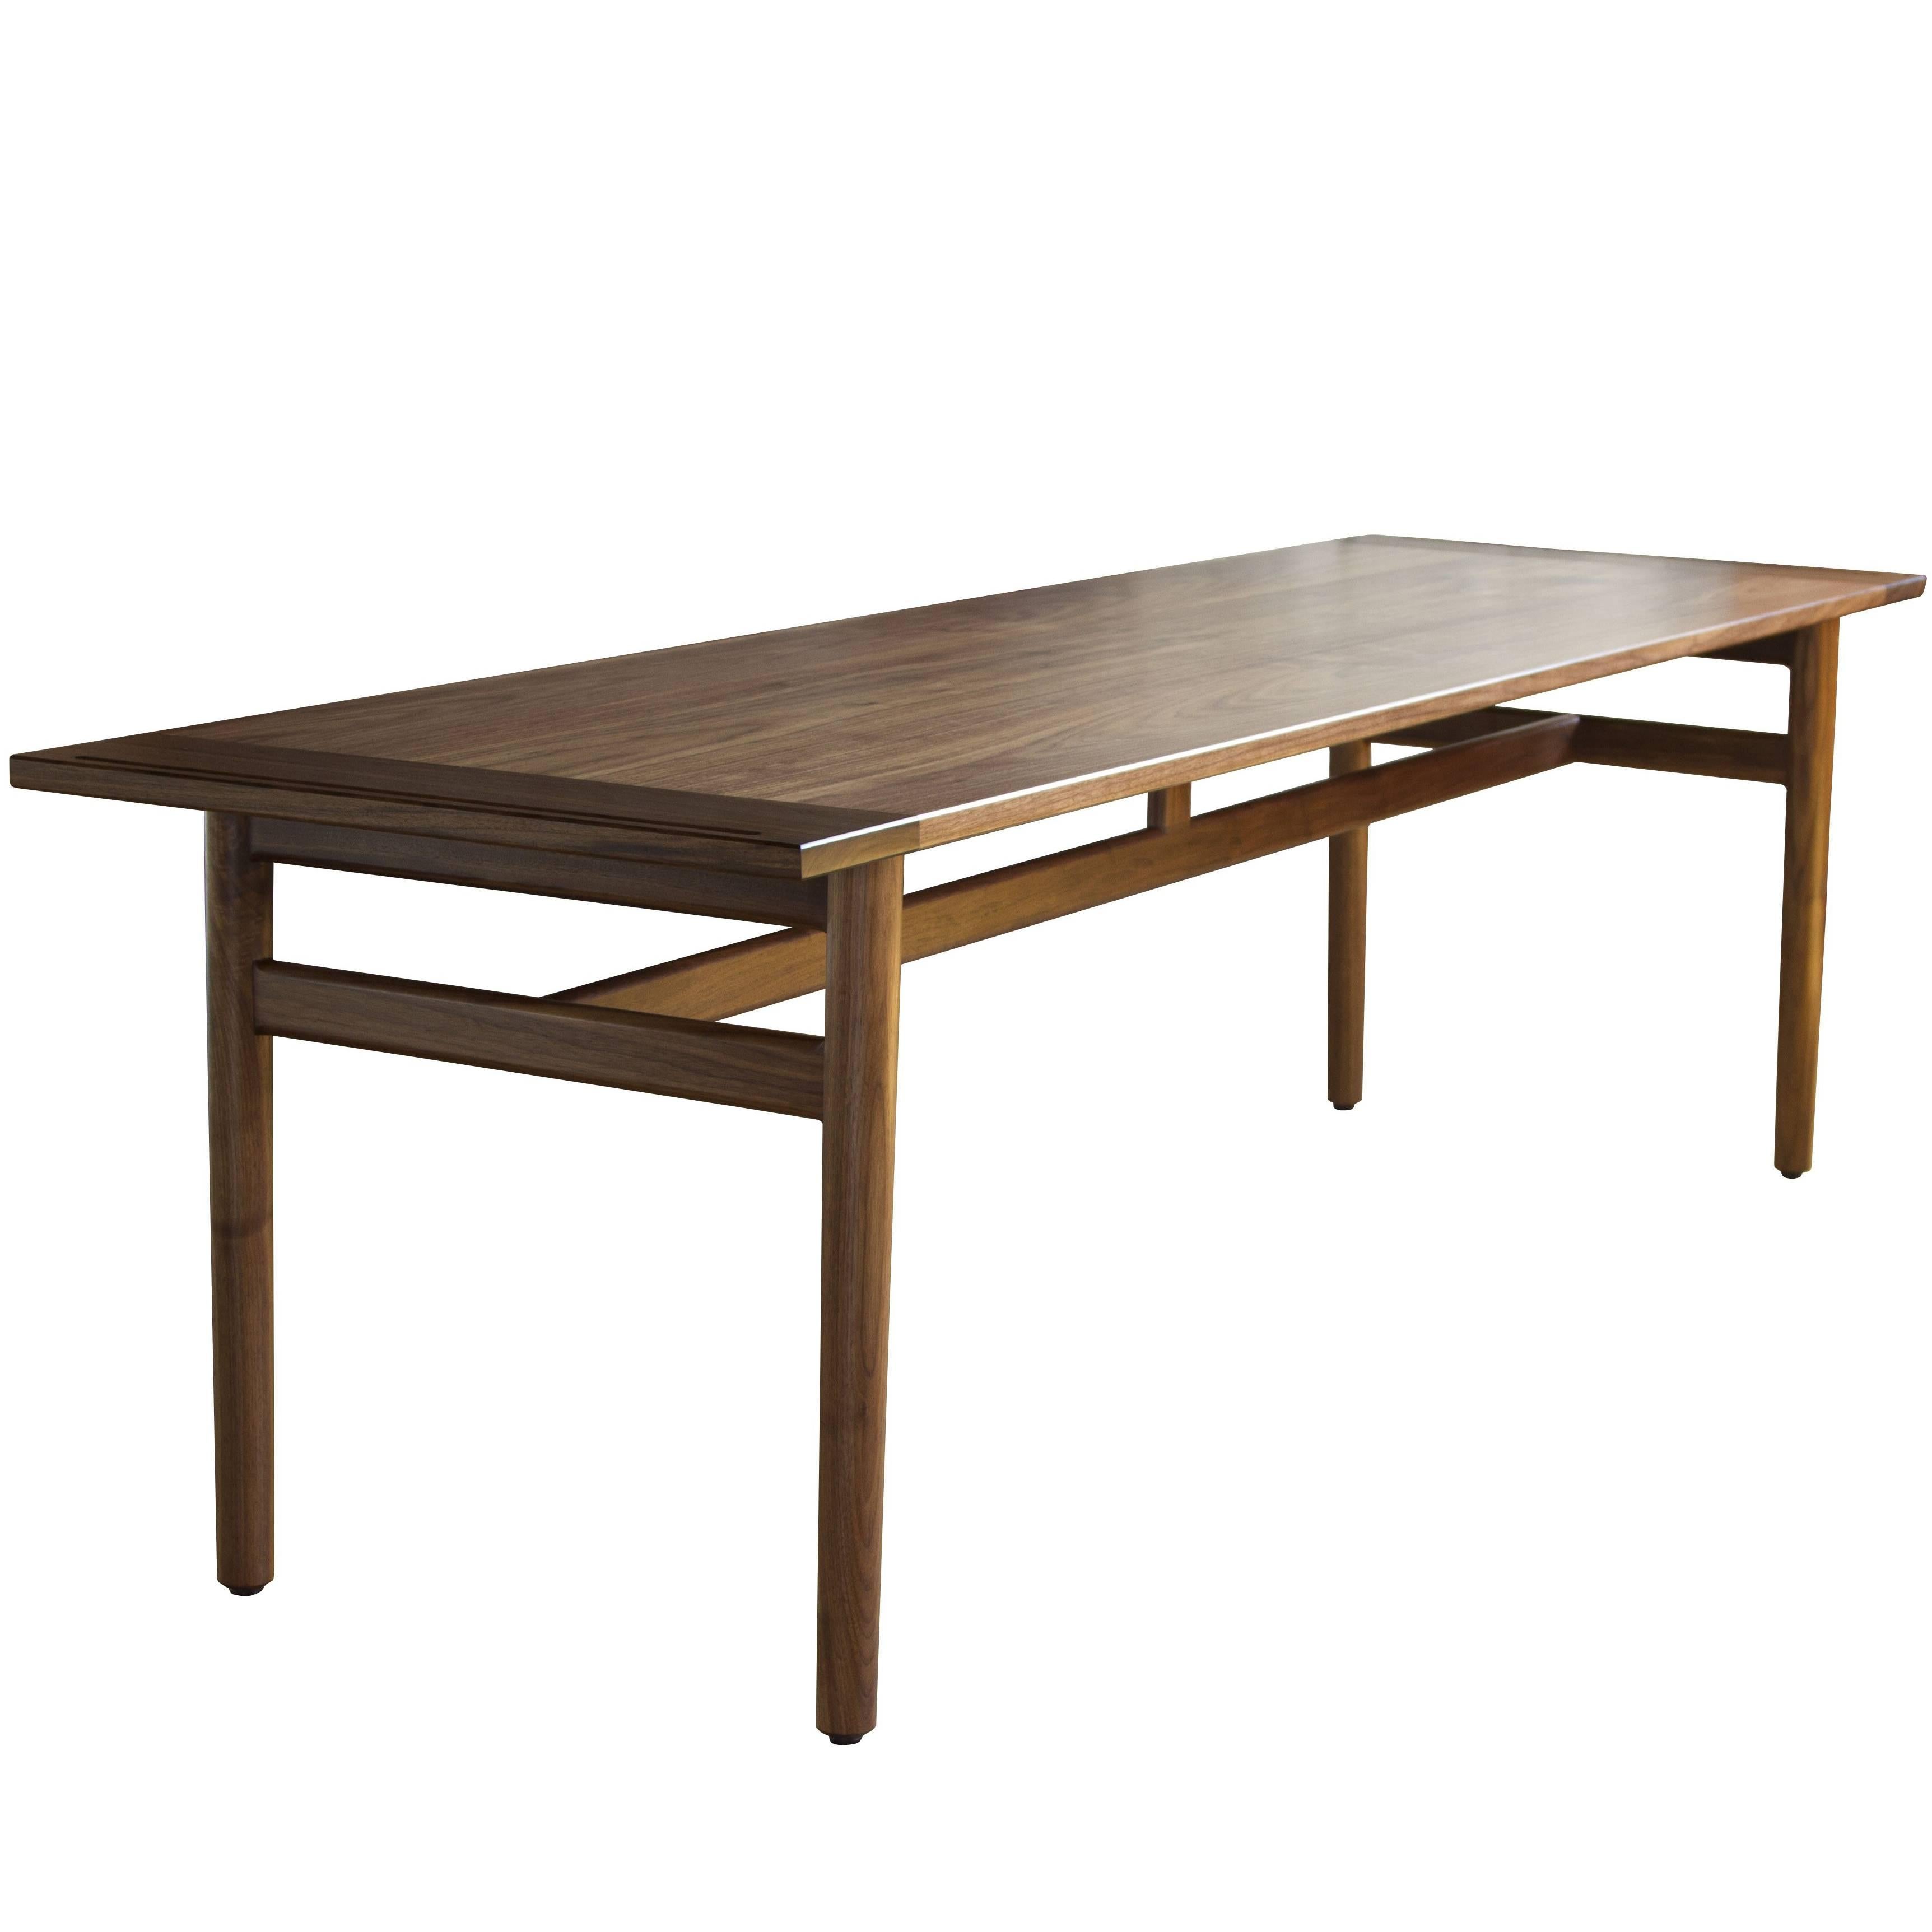 Silbrook Table in Oiled Walnut - handcrafted by Richard Wrightman Design